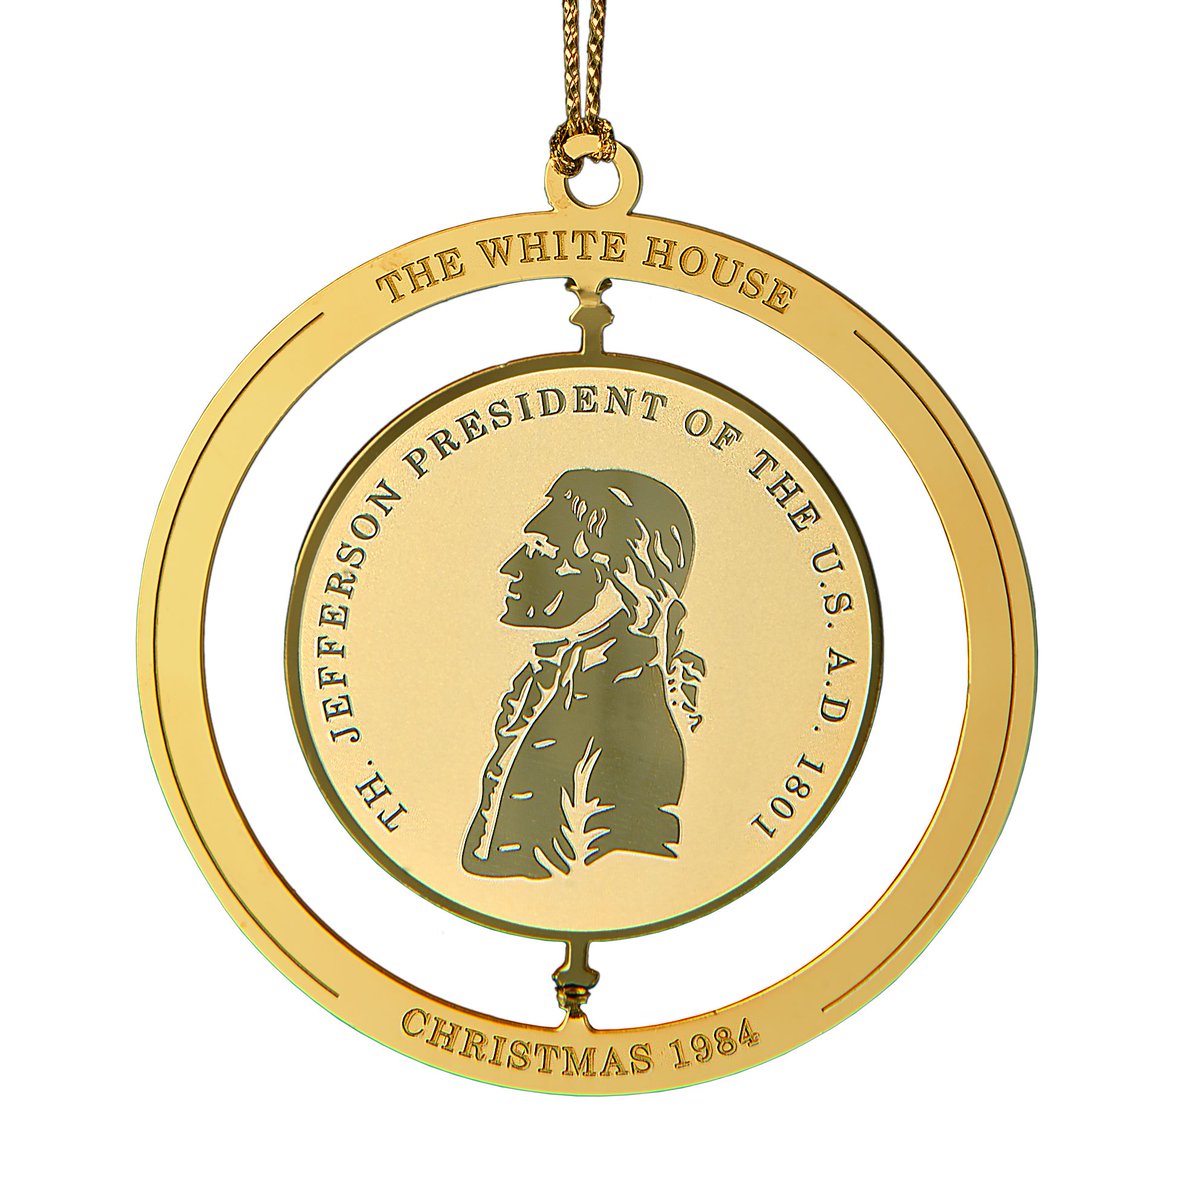 The 1984 Official White House Christmas Ornament remembers the administration of Thomas Jefferson. The design is based on the historic Jefferson Peace Medal, minted in 1801.  https://shop.whitehousehistory.org/1981-1984-first-four-white-house-ornaments-sold-as-a-set